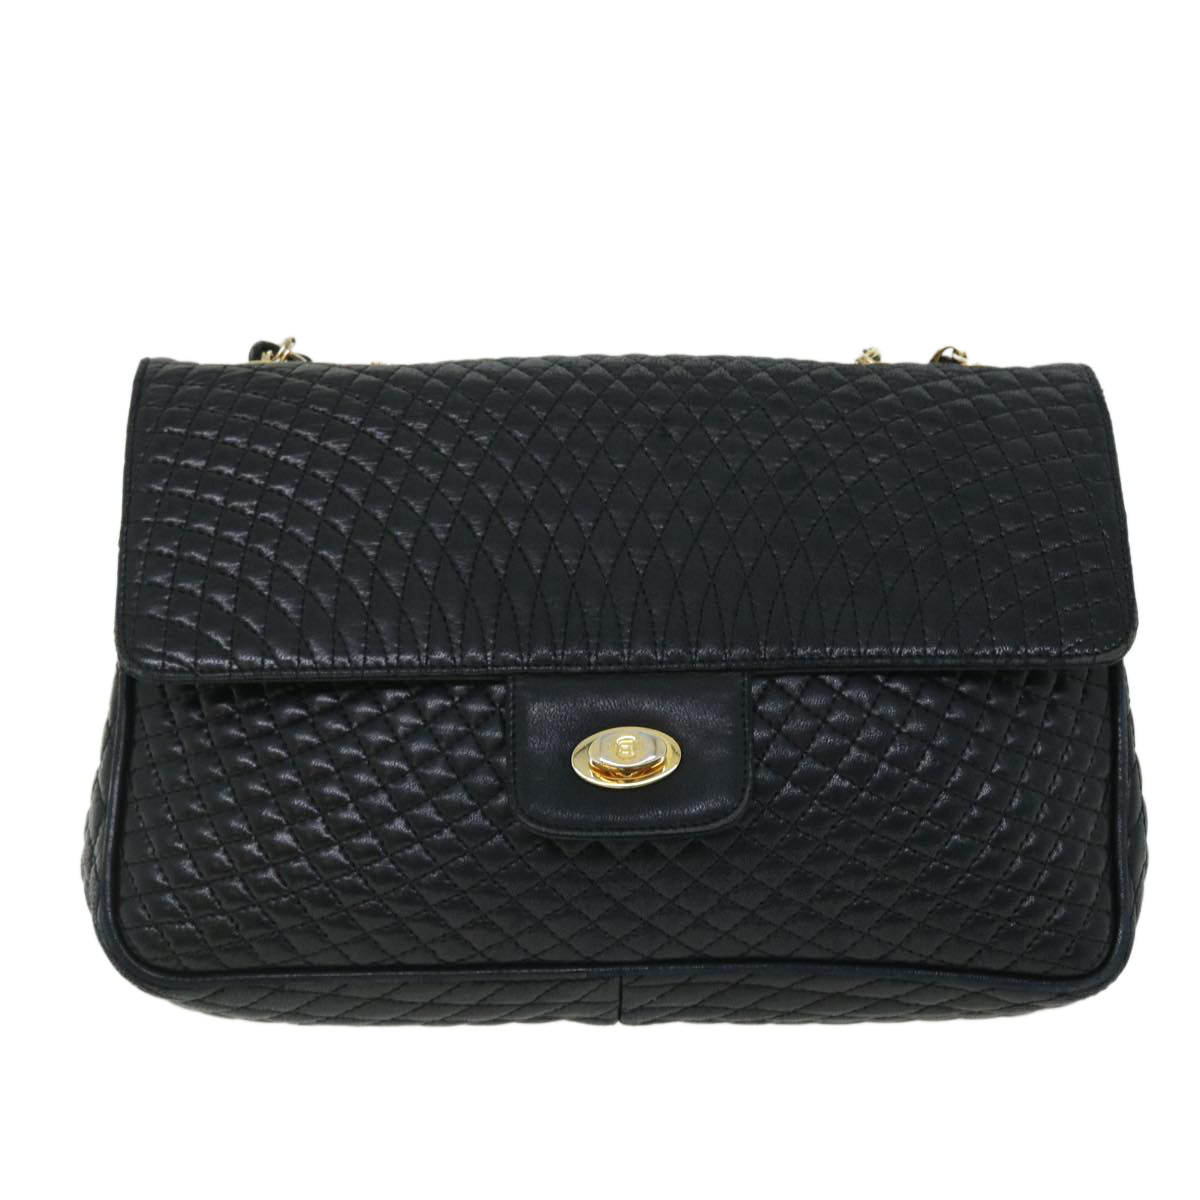 BALLY Quilted Shoulder Bag Leather Black Auth 52025